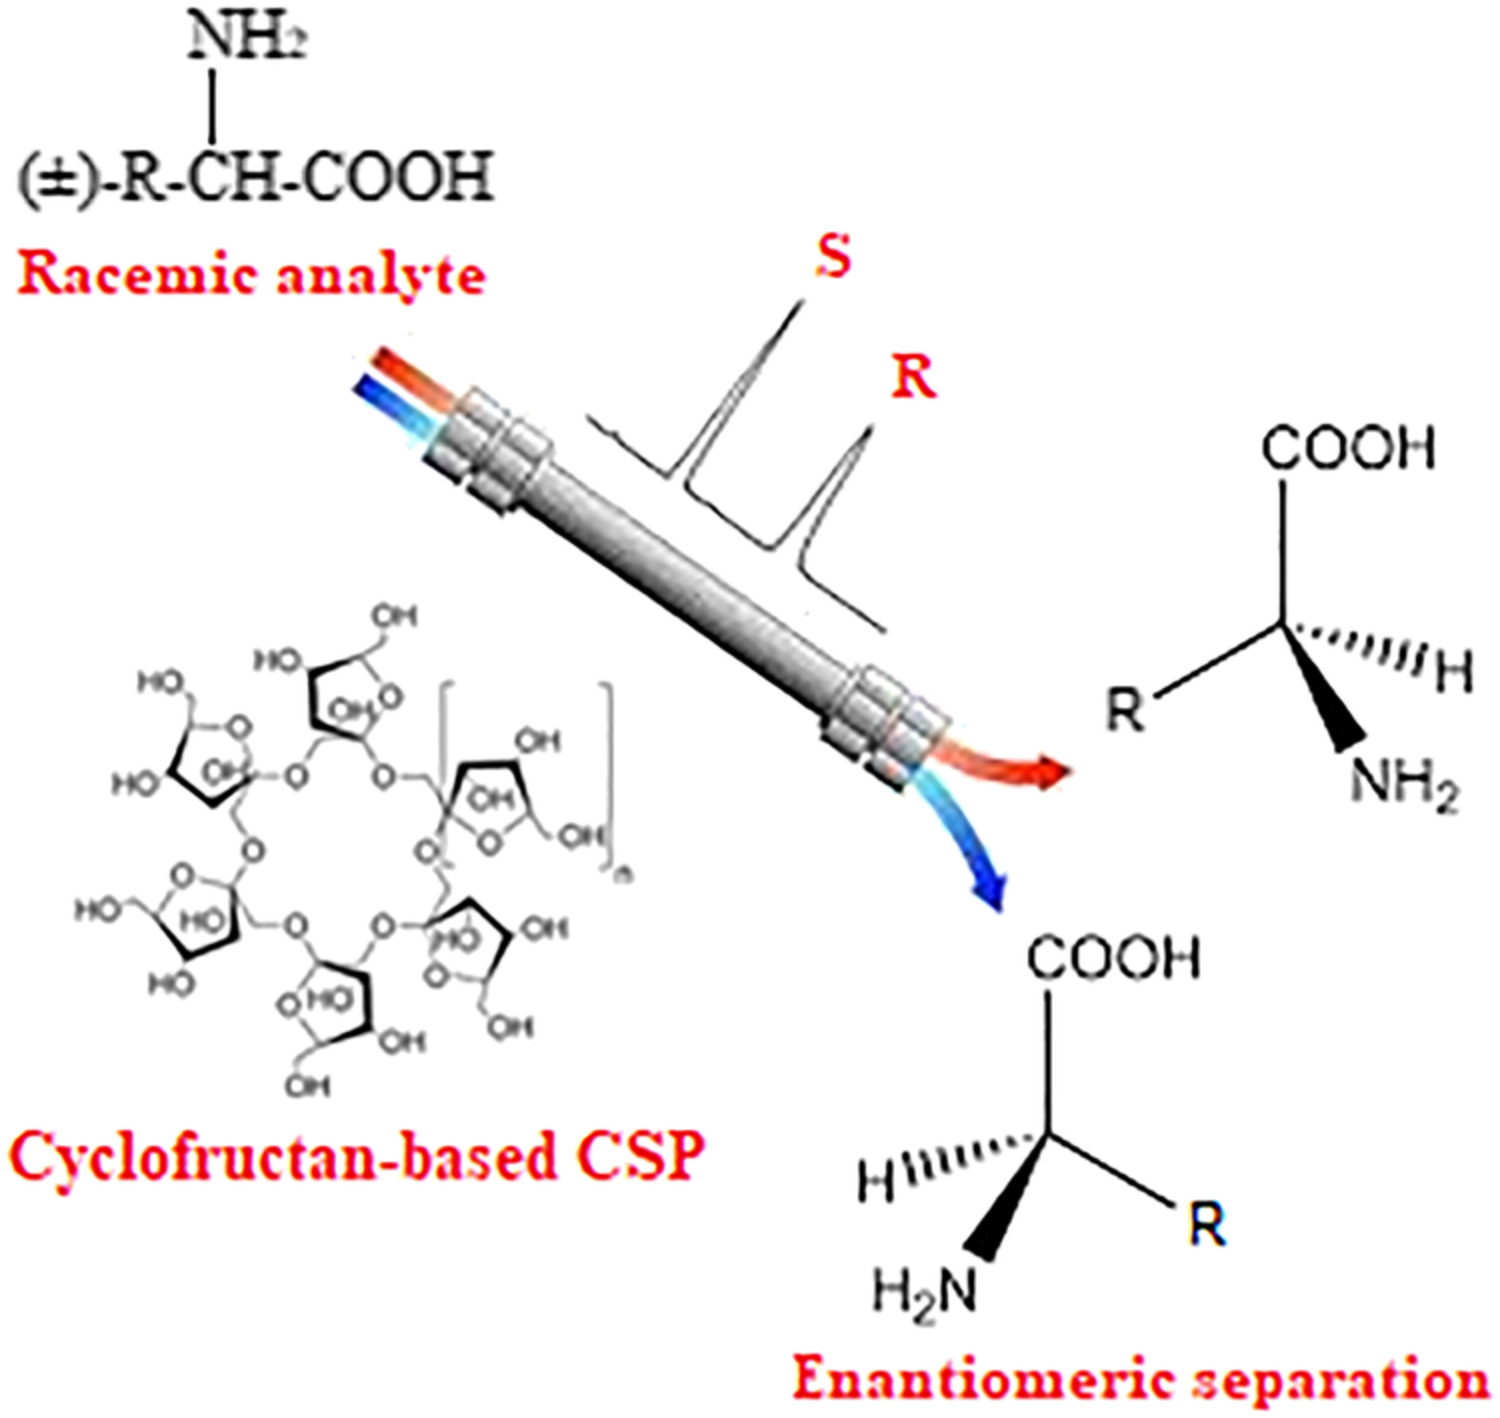 Impact of cyclofructan derivatives as efficient chiral selector in chiral analysis: An overview